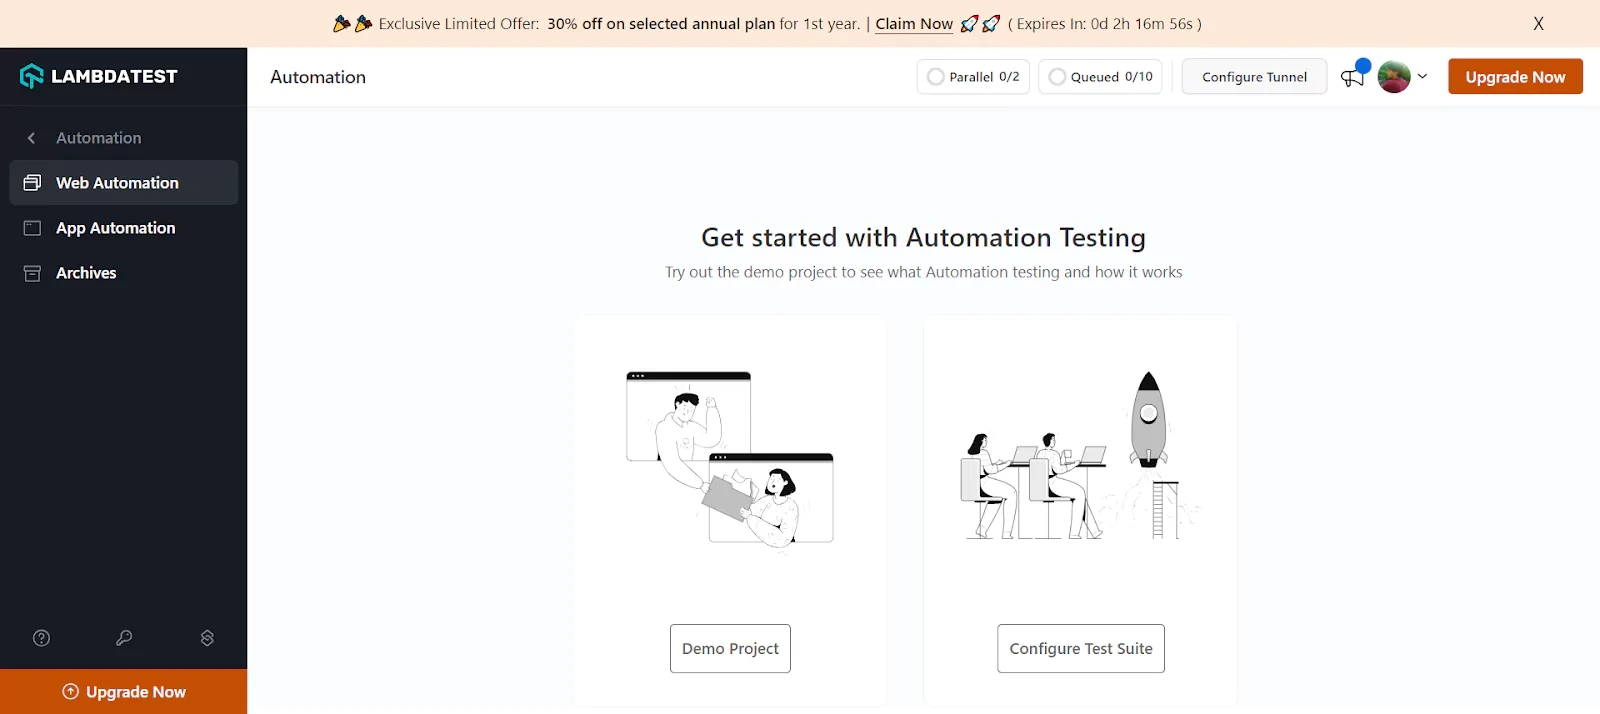 Demo Project and Configure Test Suite